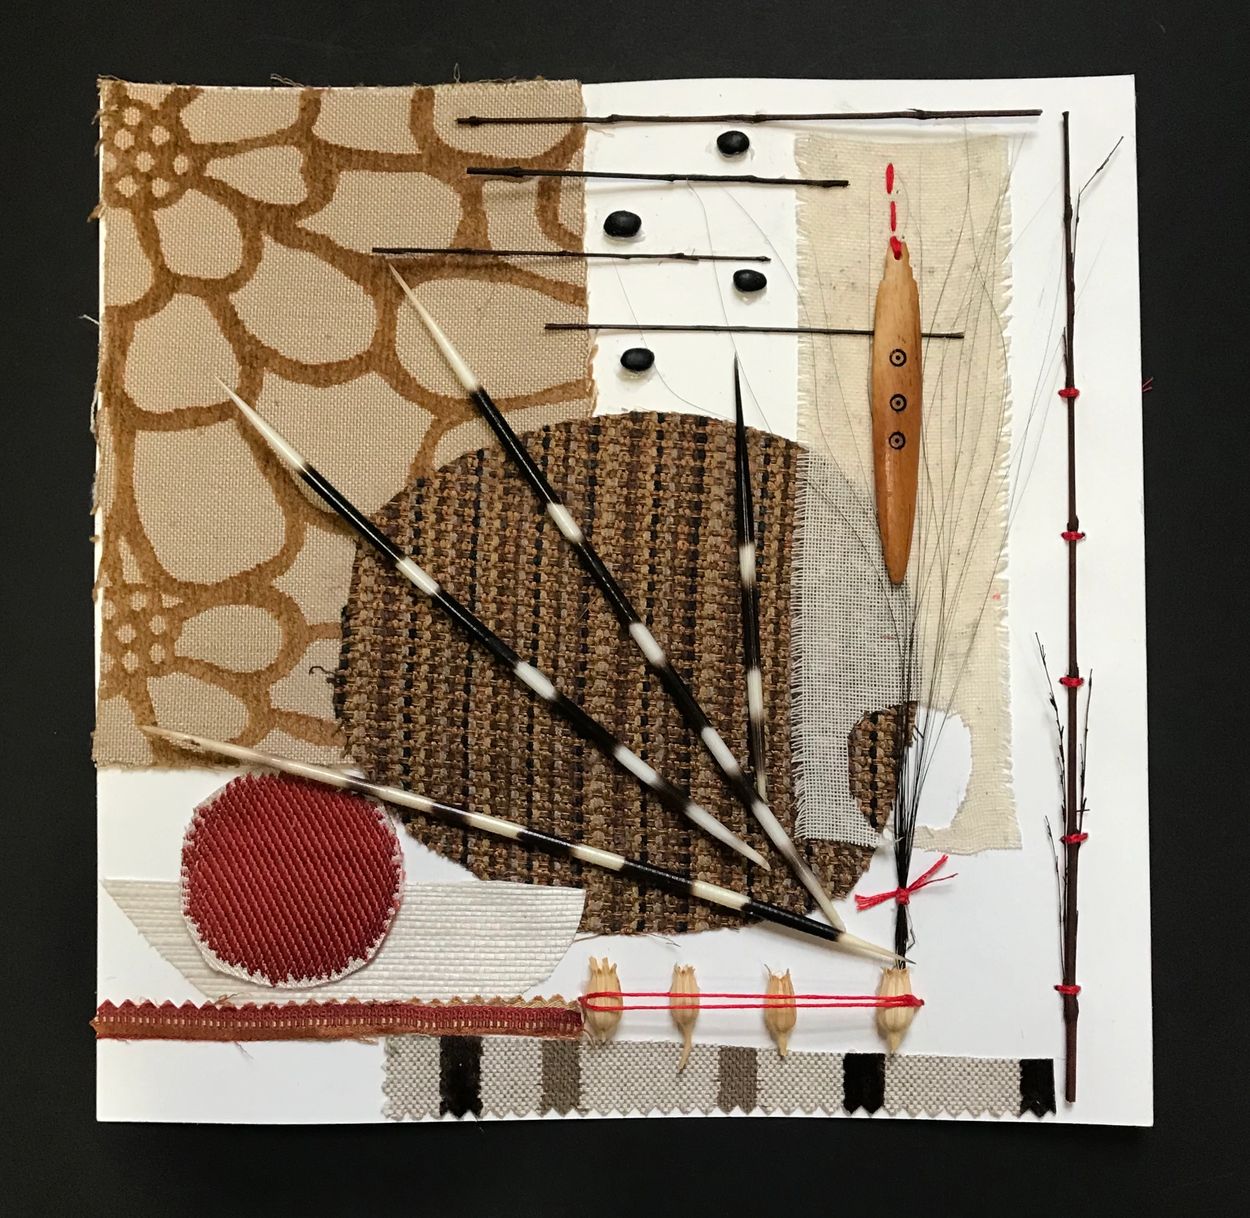 SOLD  "Protection" collage 12"x12' fabric,earthly finds,porcupine quills,beans,thread,zen circle